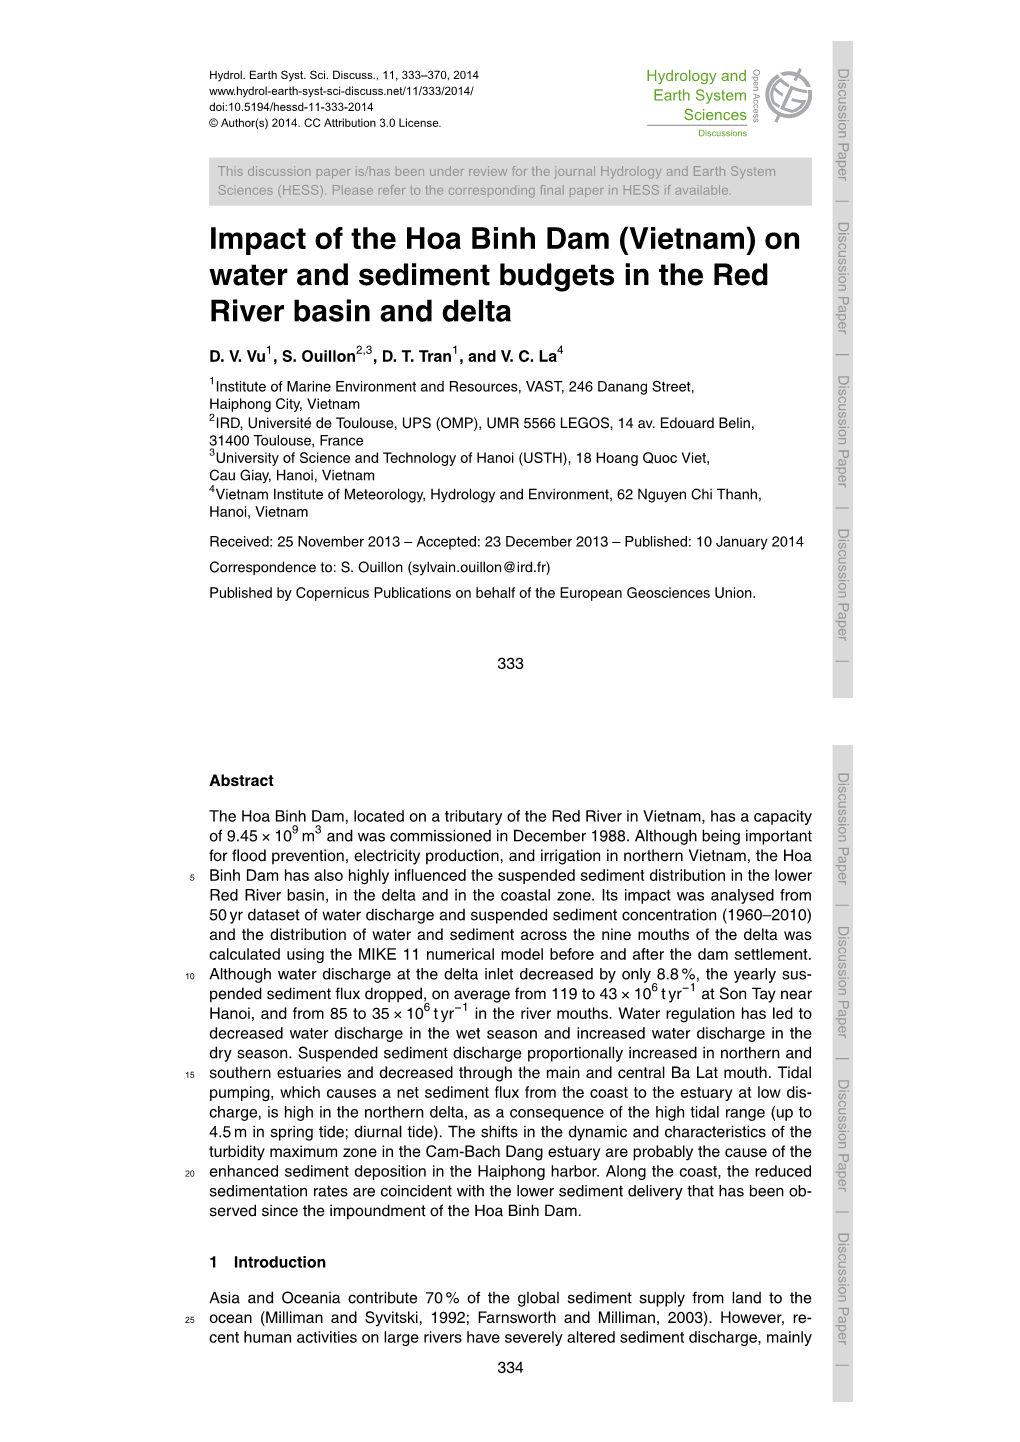 Impact of the Hoa Binh Dam (Vietnam) on Water and Sediment